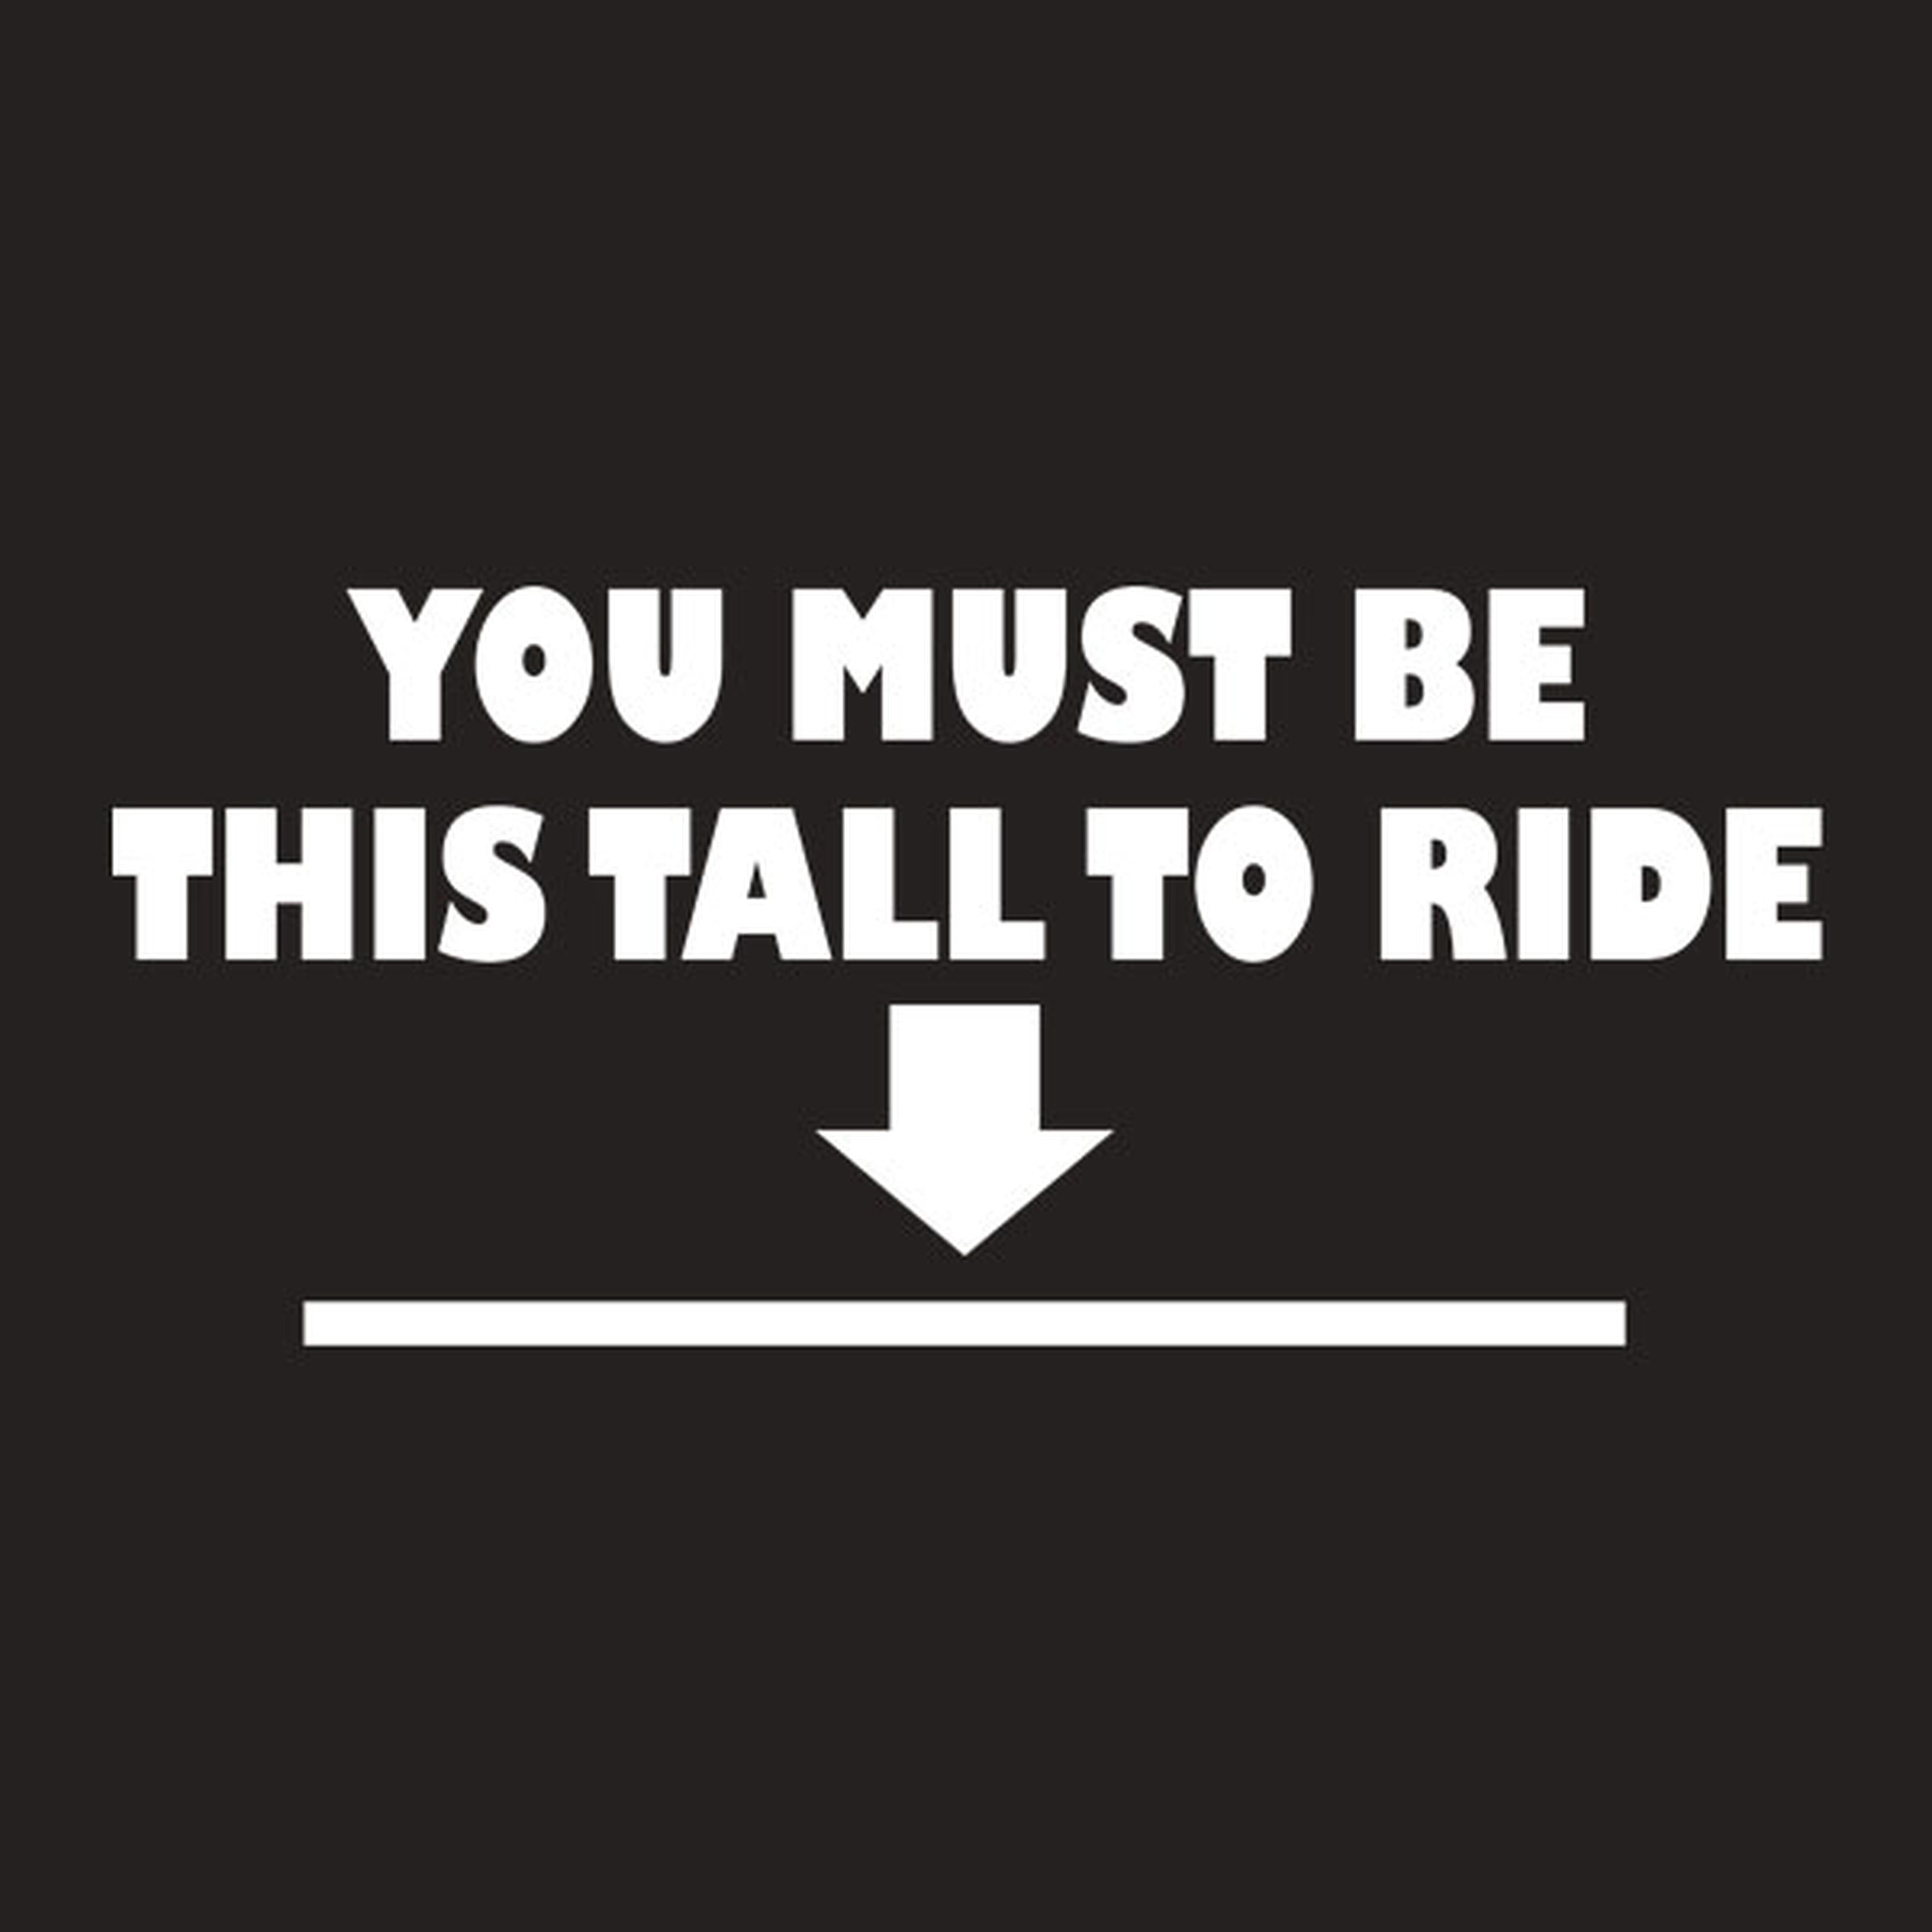 You must be this tall to ride - T-shirt